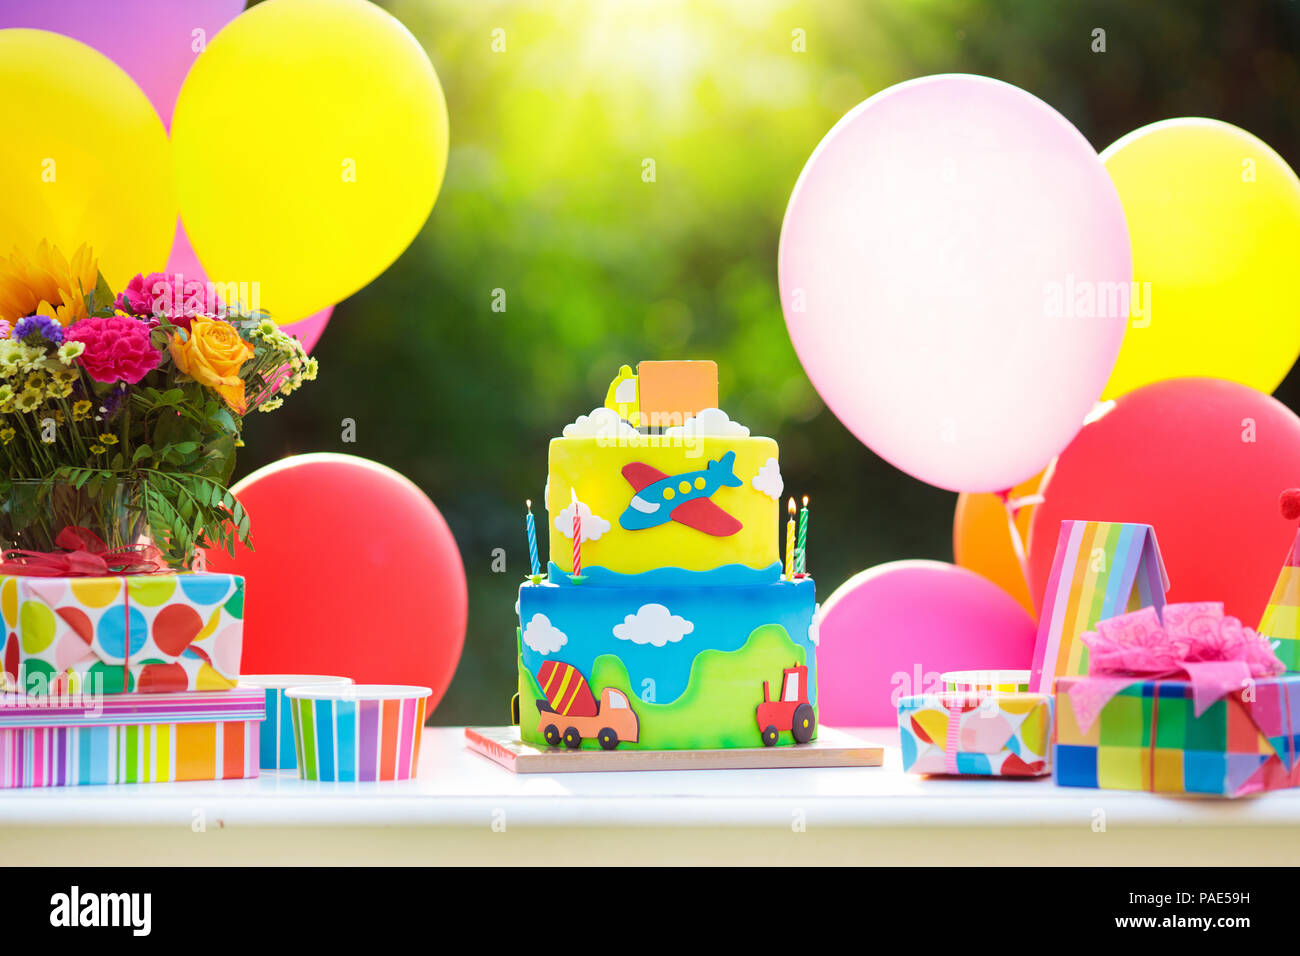 Kids birthday party decoration. Colorful cake with candles. Car and transportation theme boys party. Decorated table for child birthday celebration. R Stock Photo